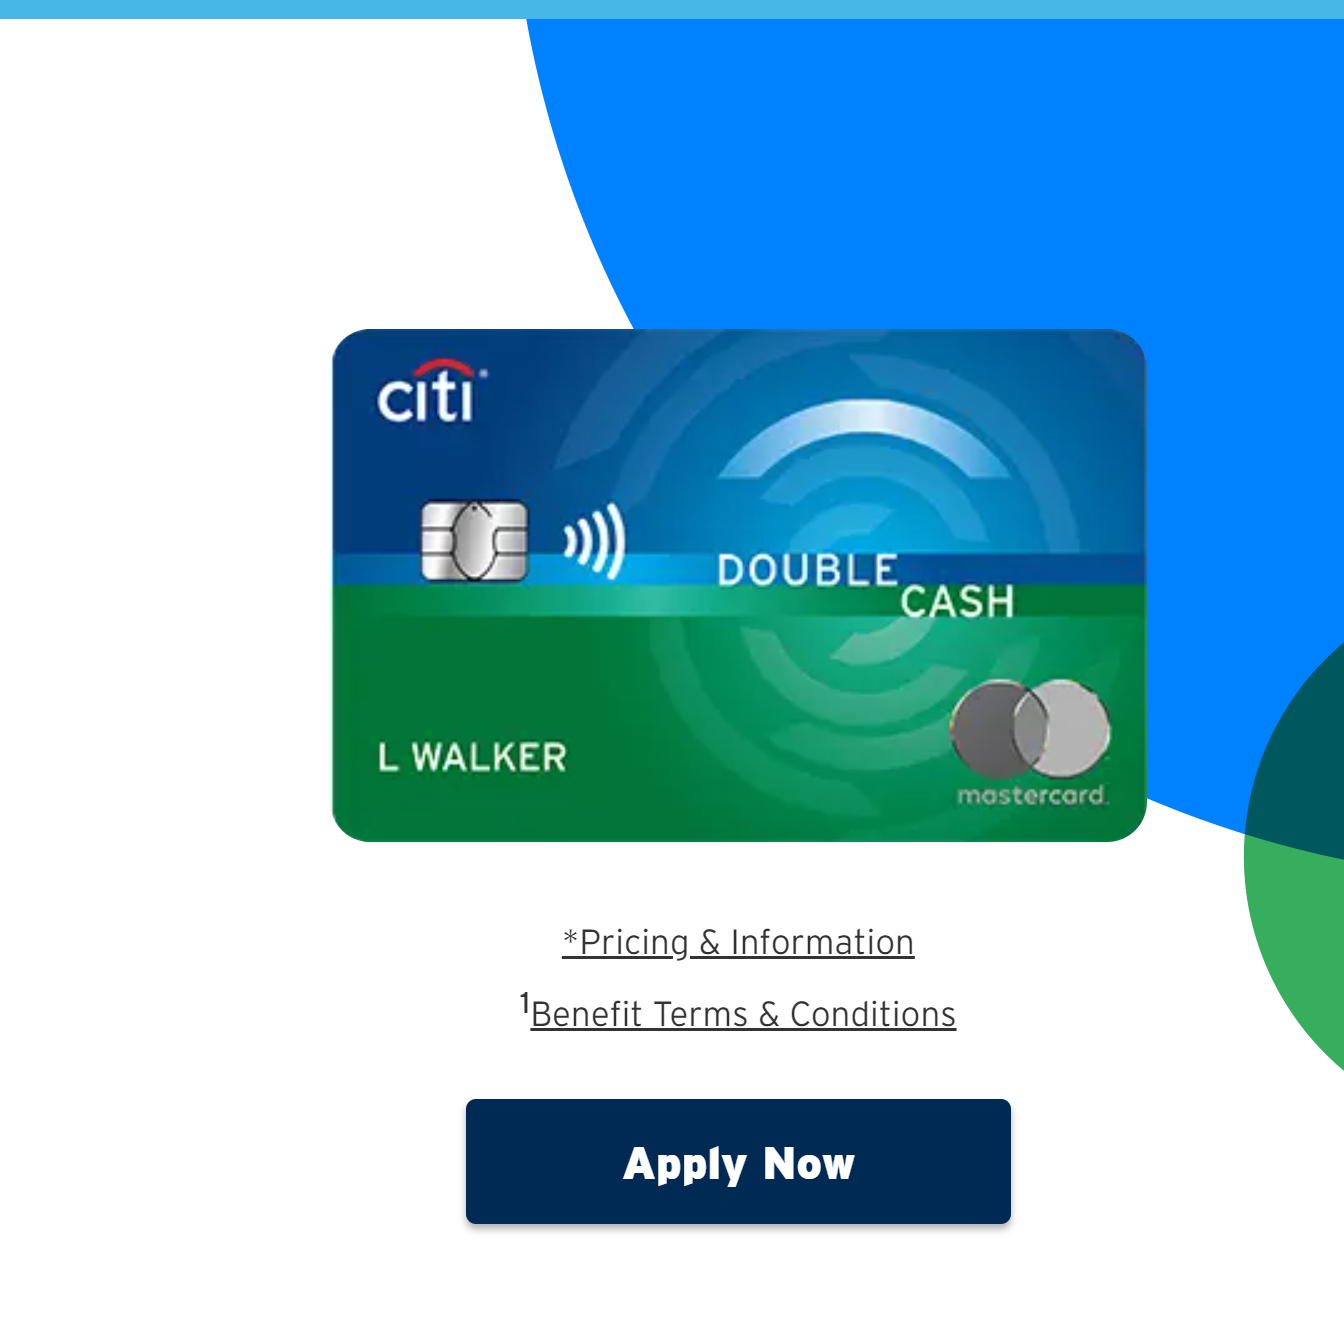 Citi Double Cash MasterCard - why have you not applied?